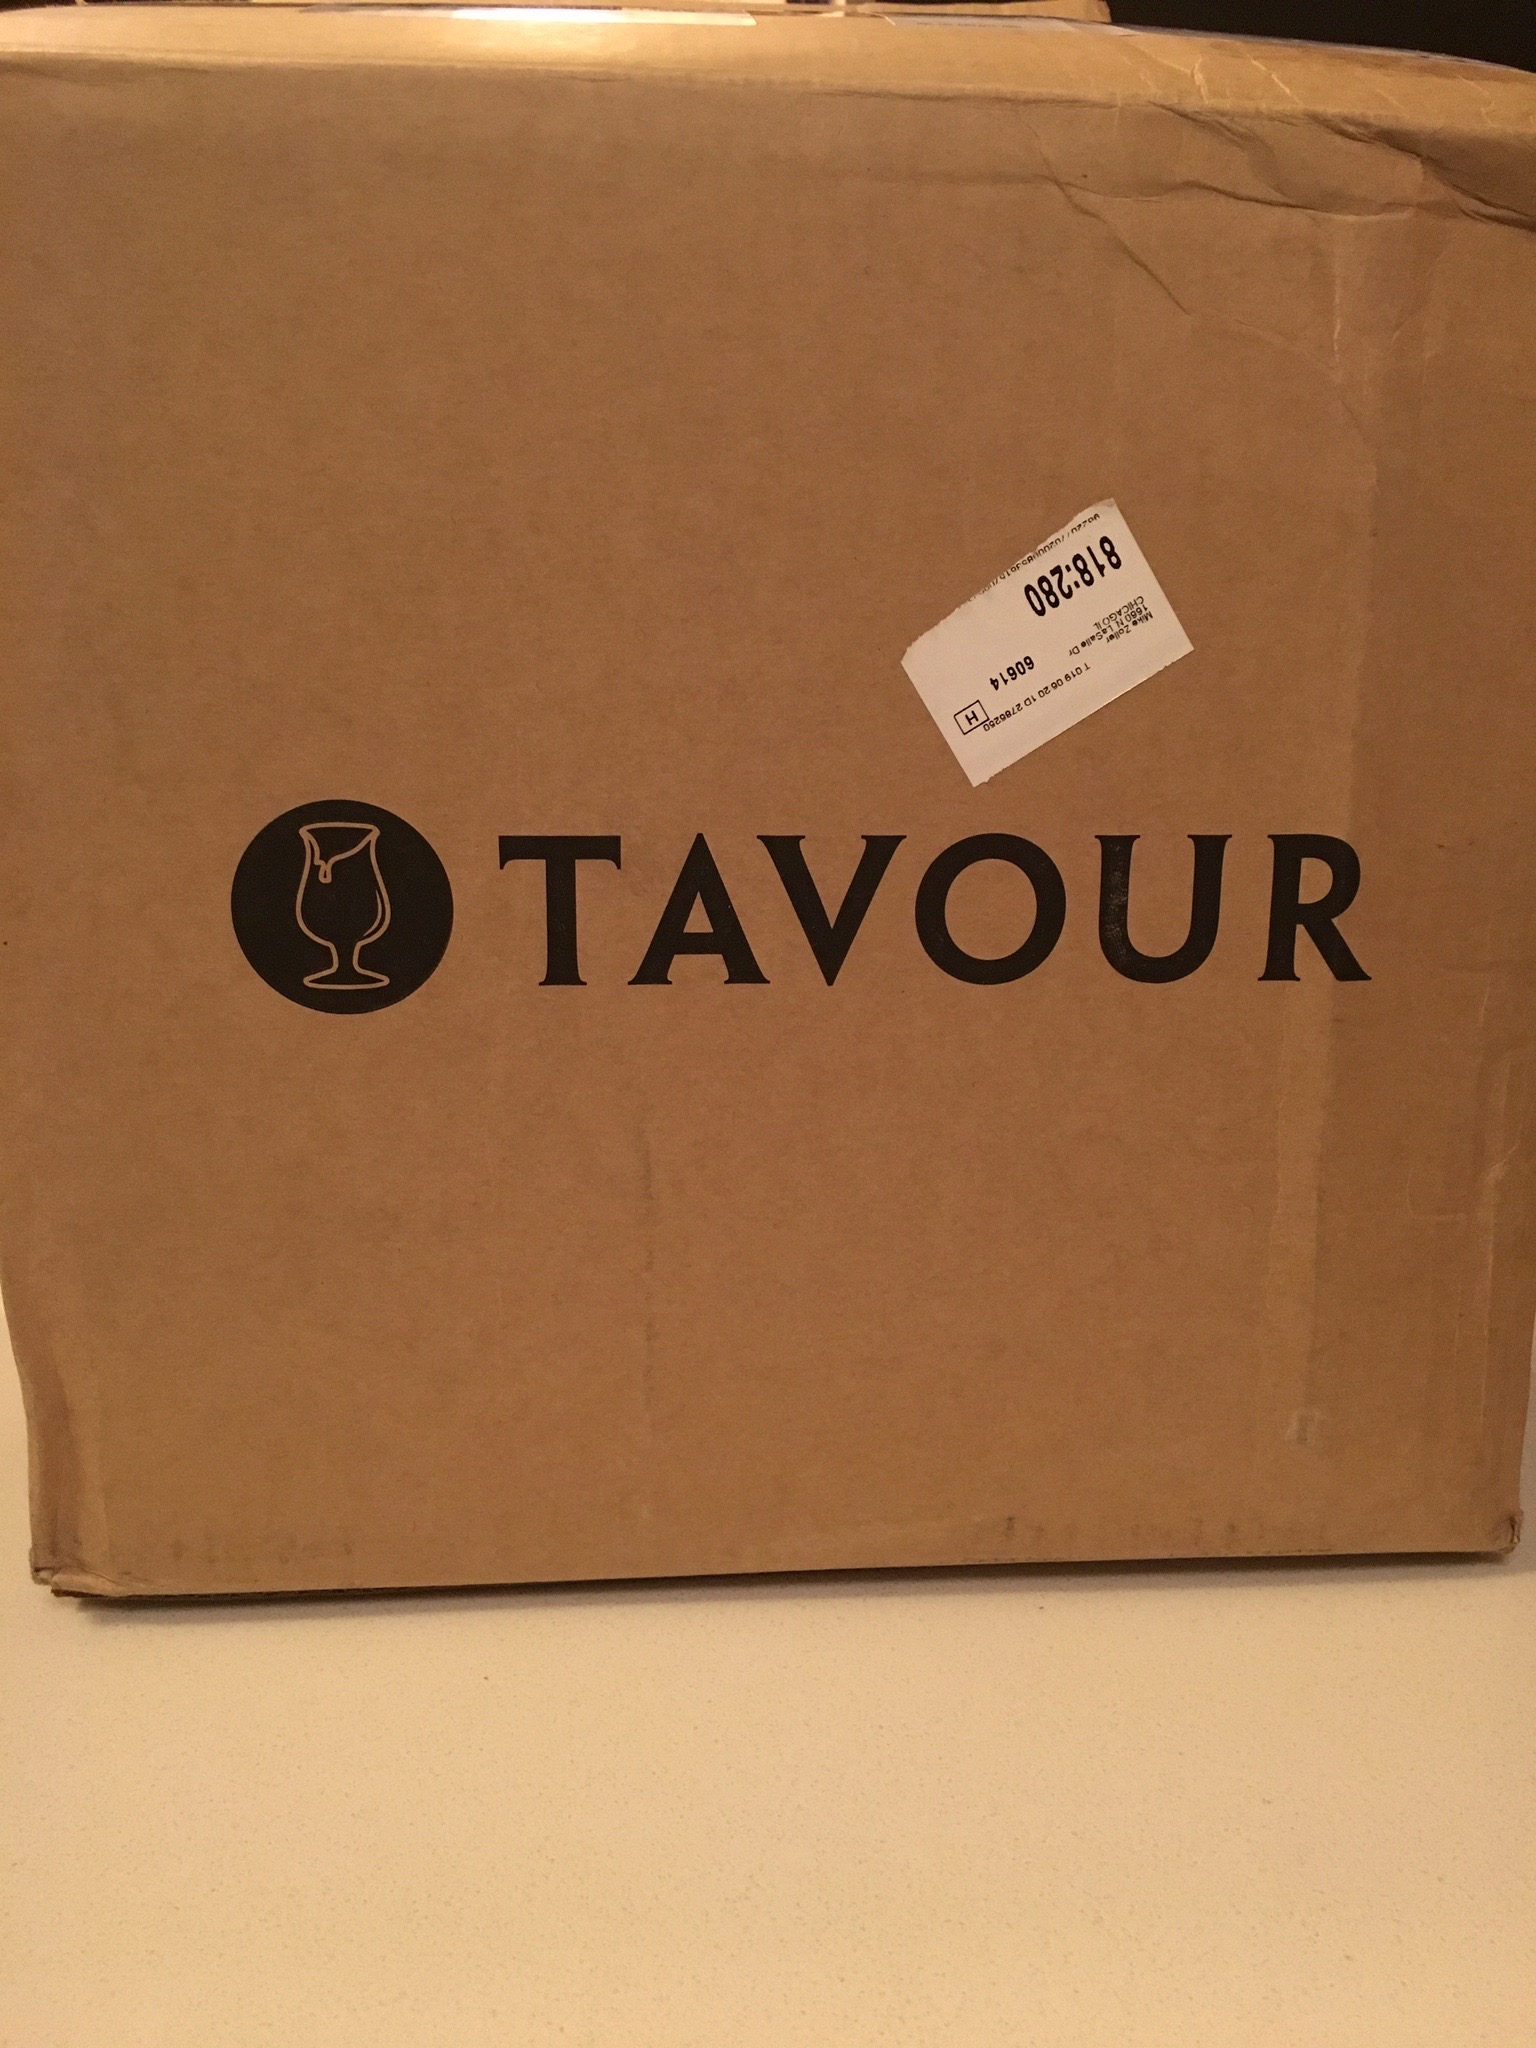 Tavour craft beer shipping